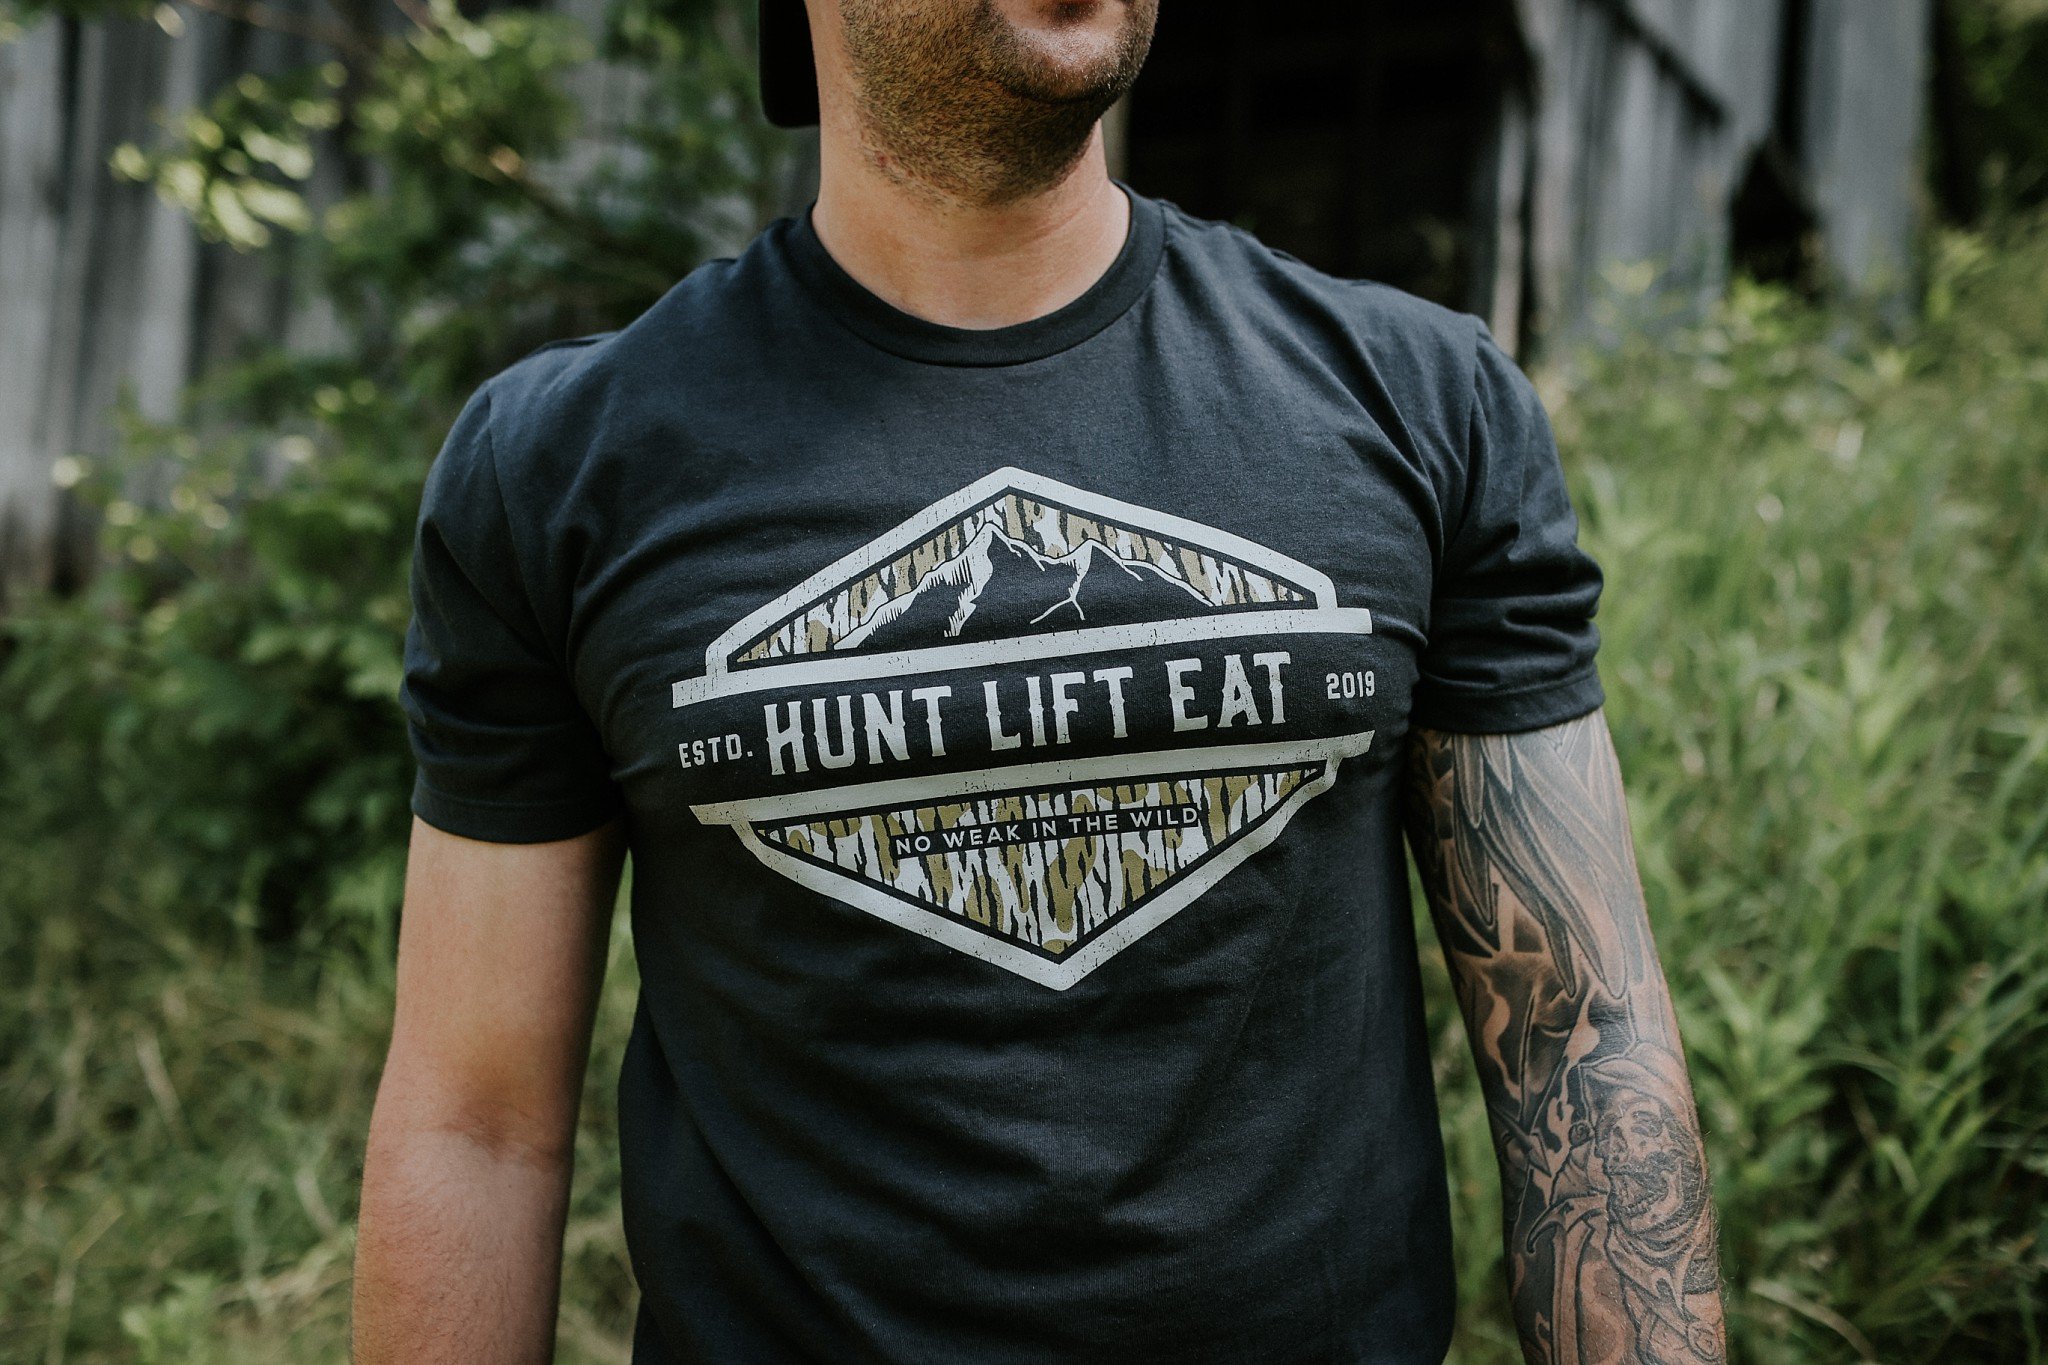 tennessee-outdoor-lifestyle-hunting-hunt-lift-eat-product-brand-branding-photography-entrepreneur-small-business-johnson-city-bristol-kingsport-east-tn-katy-sergent_0053.jpg